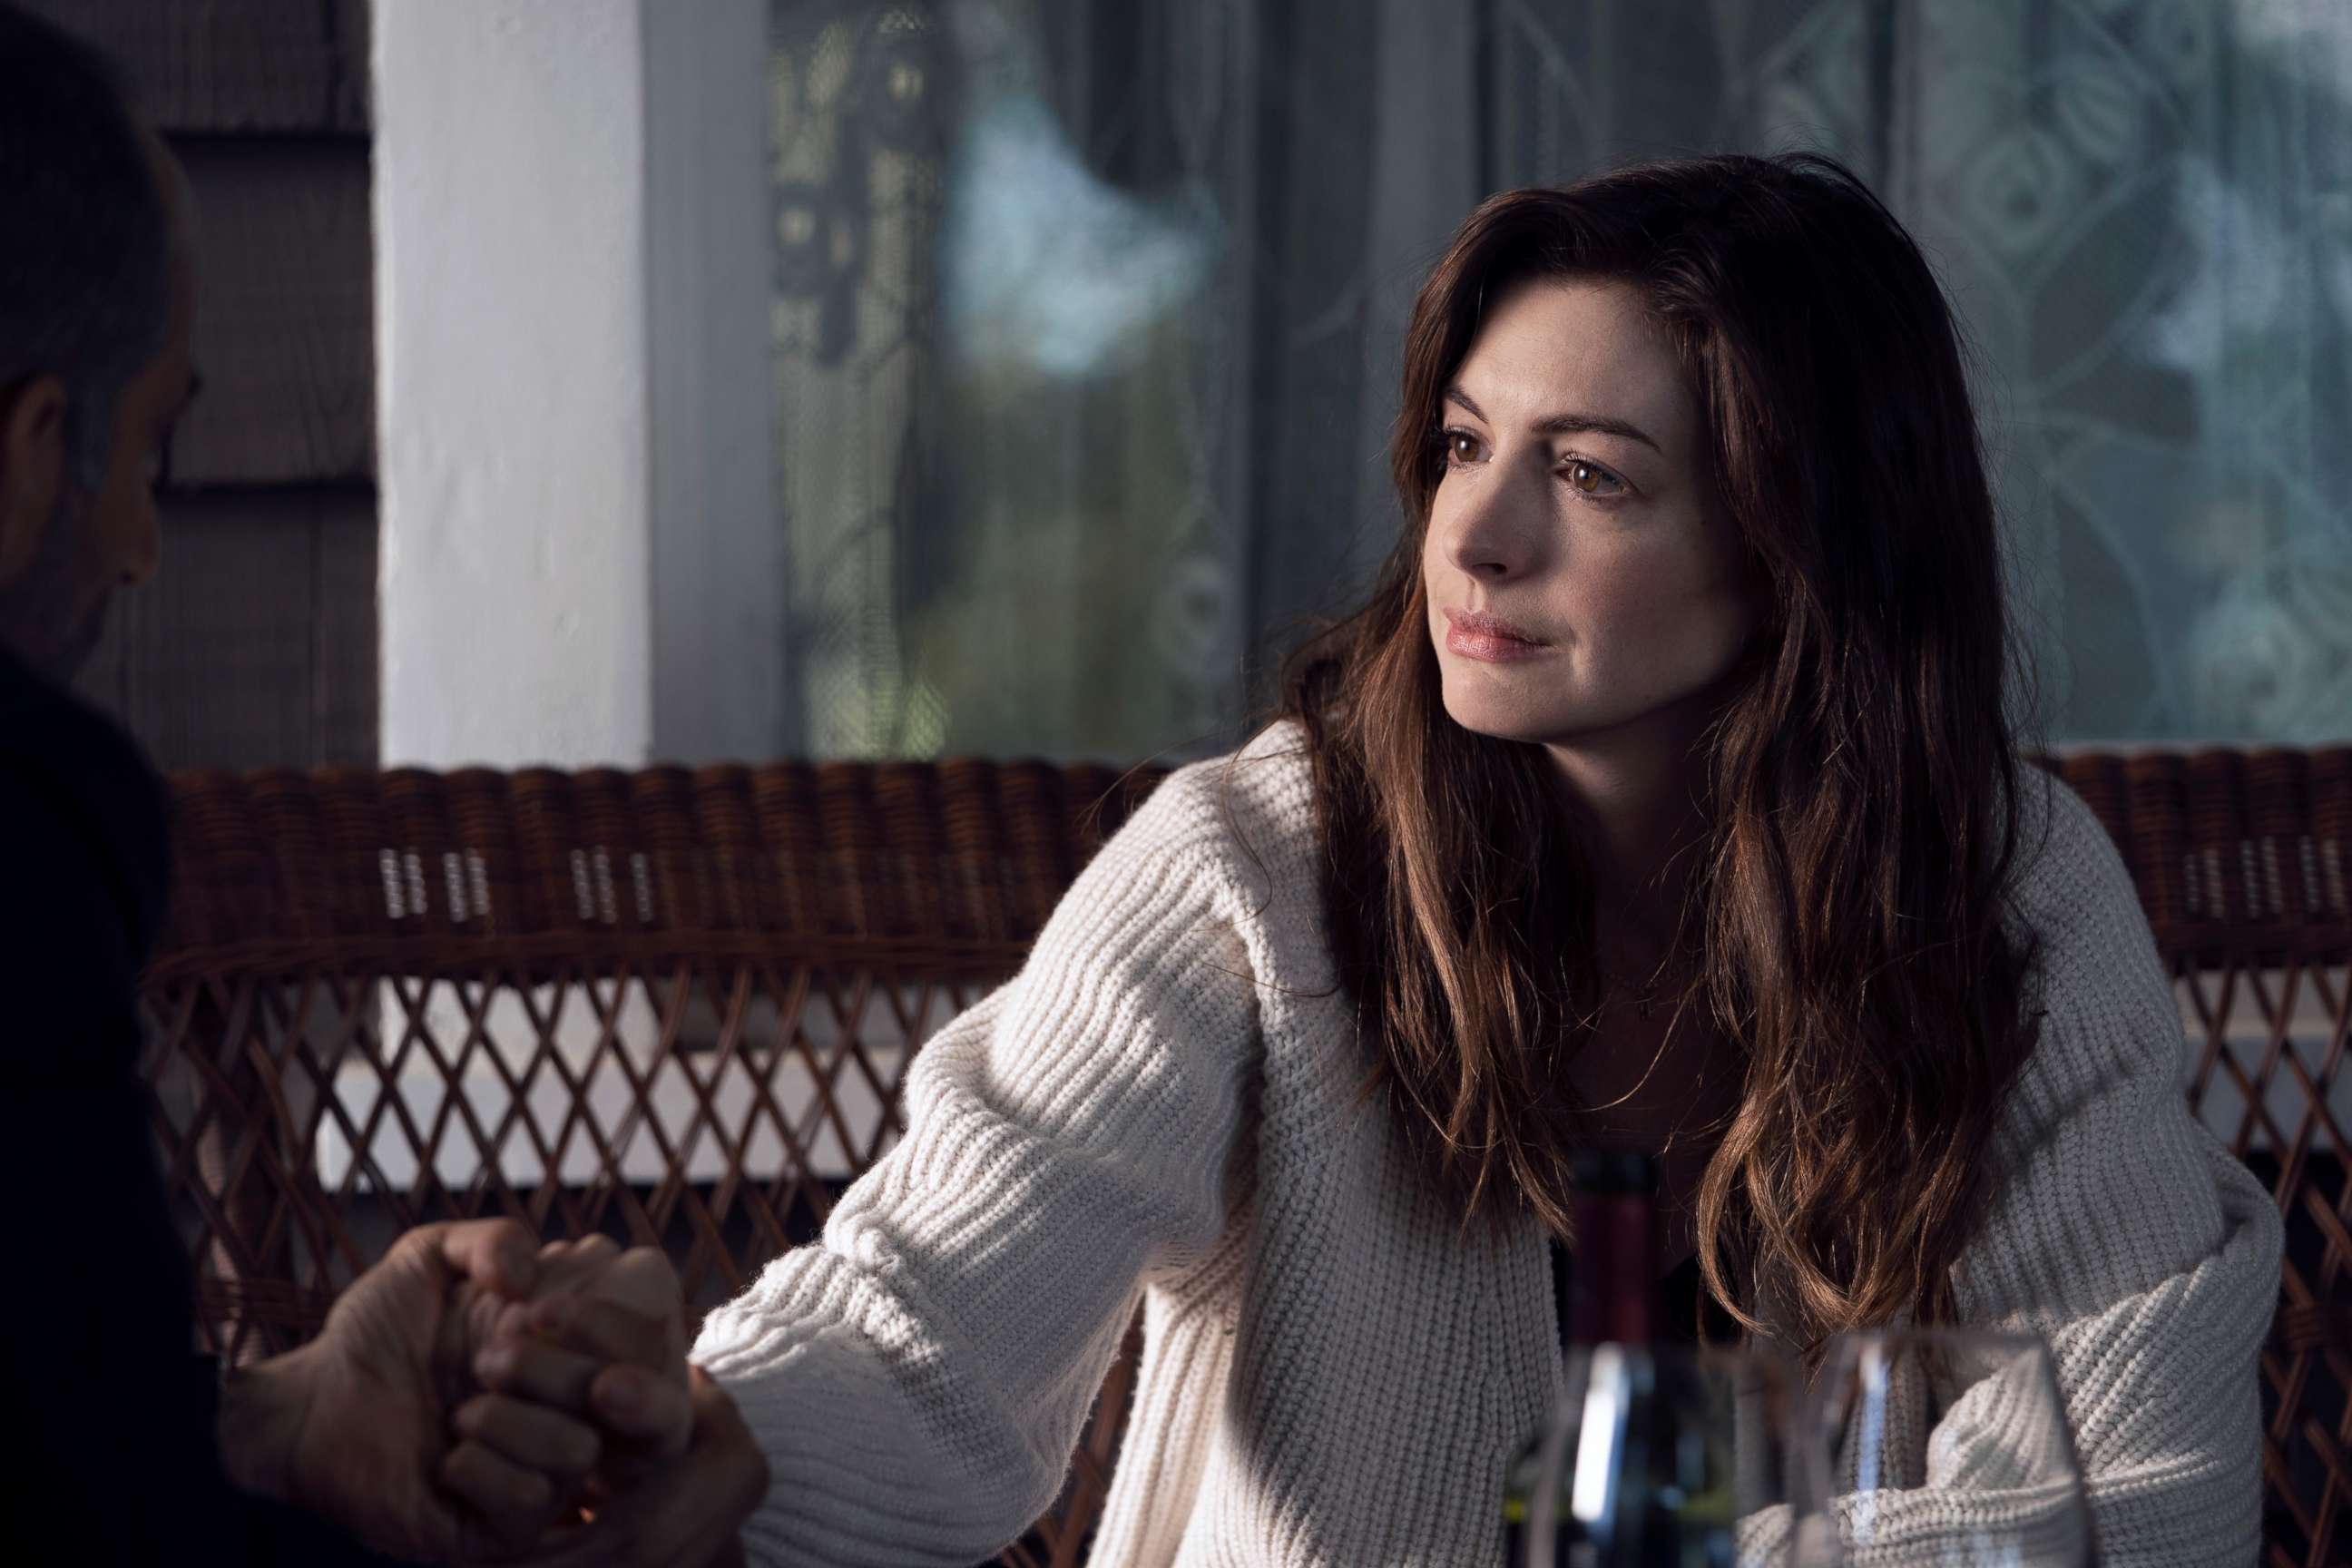 PHOTO: Anne Hathaway in the limited series “WeCrashed” on Apple TV+.